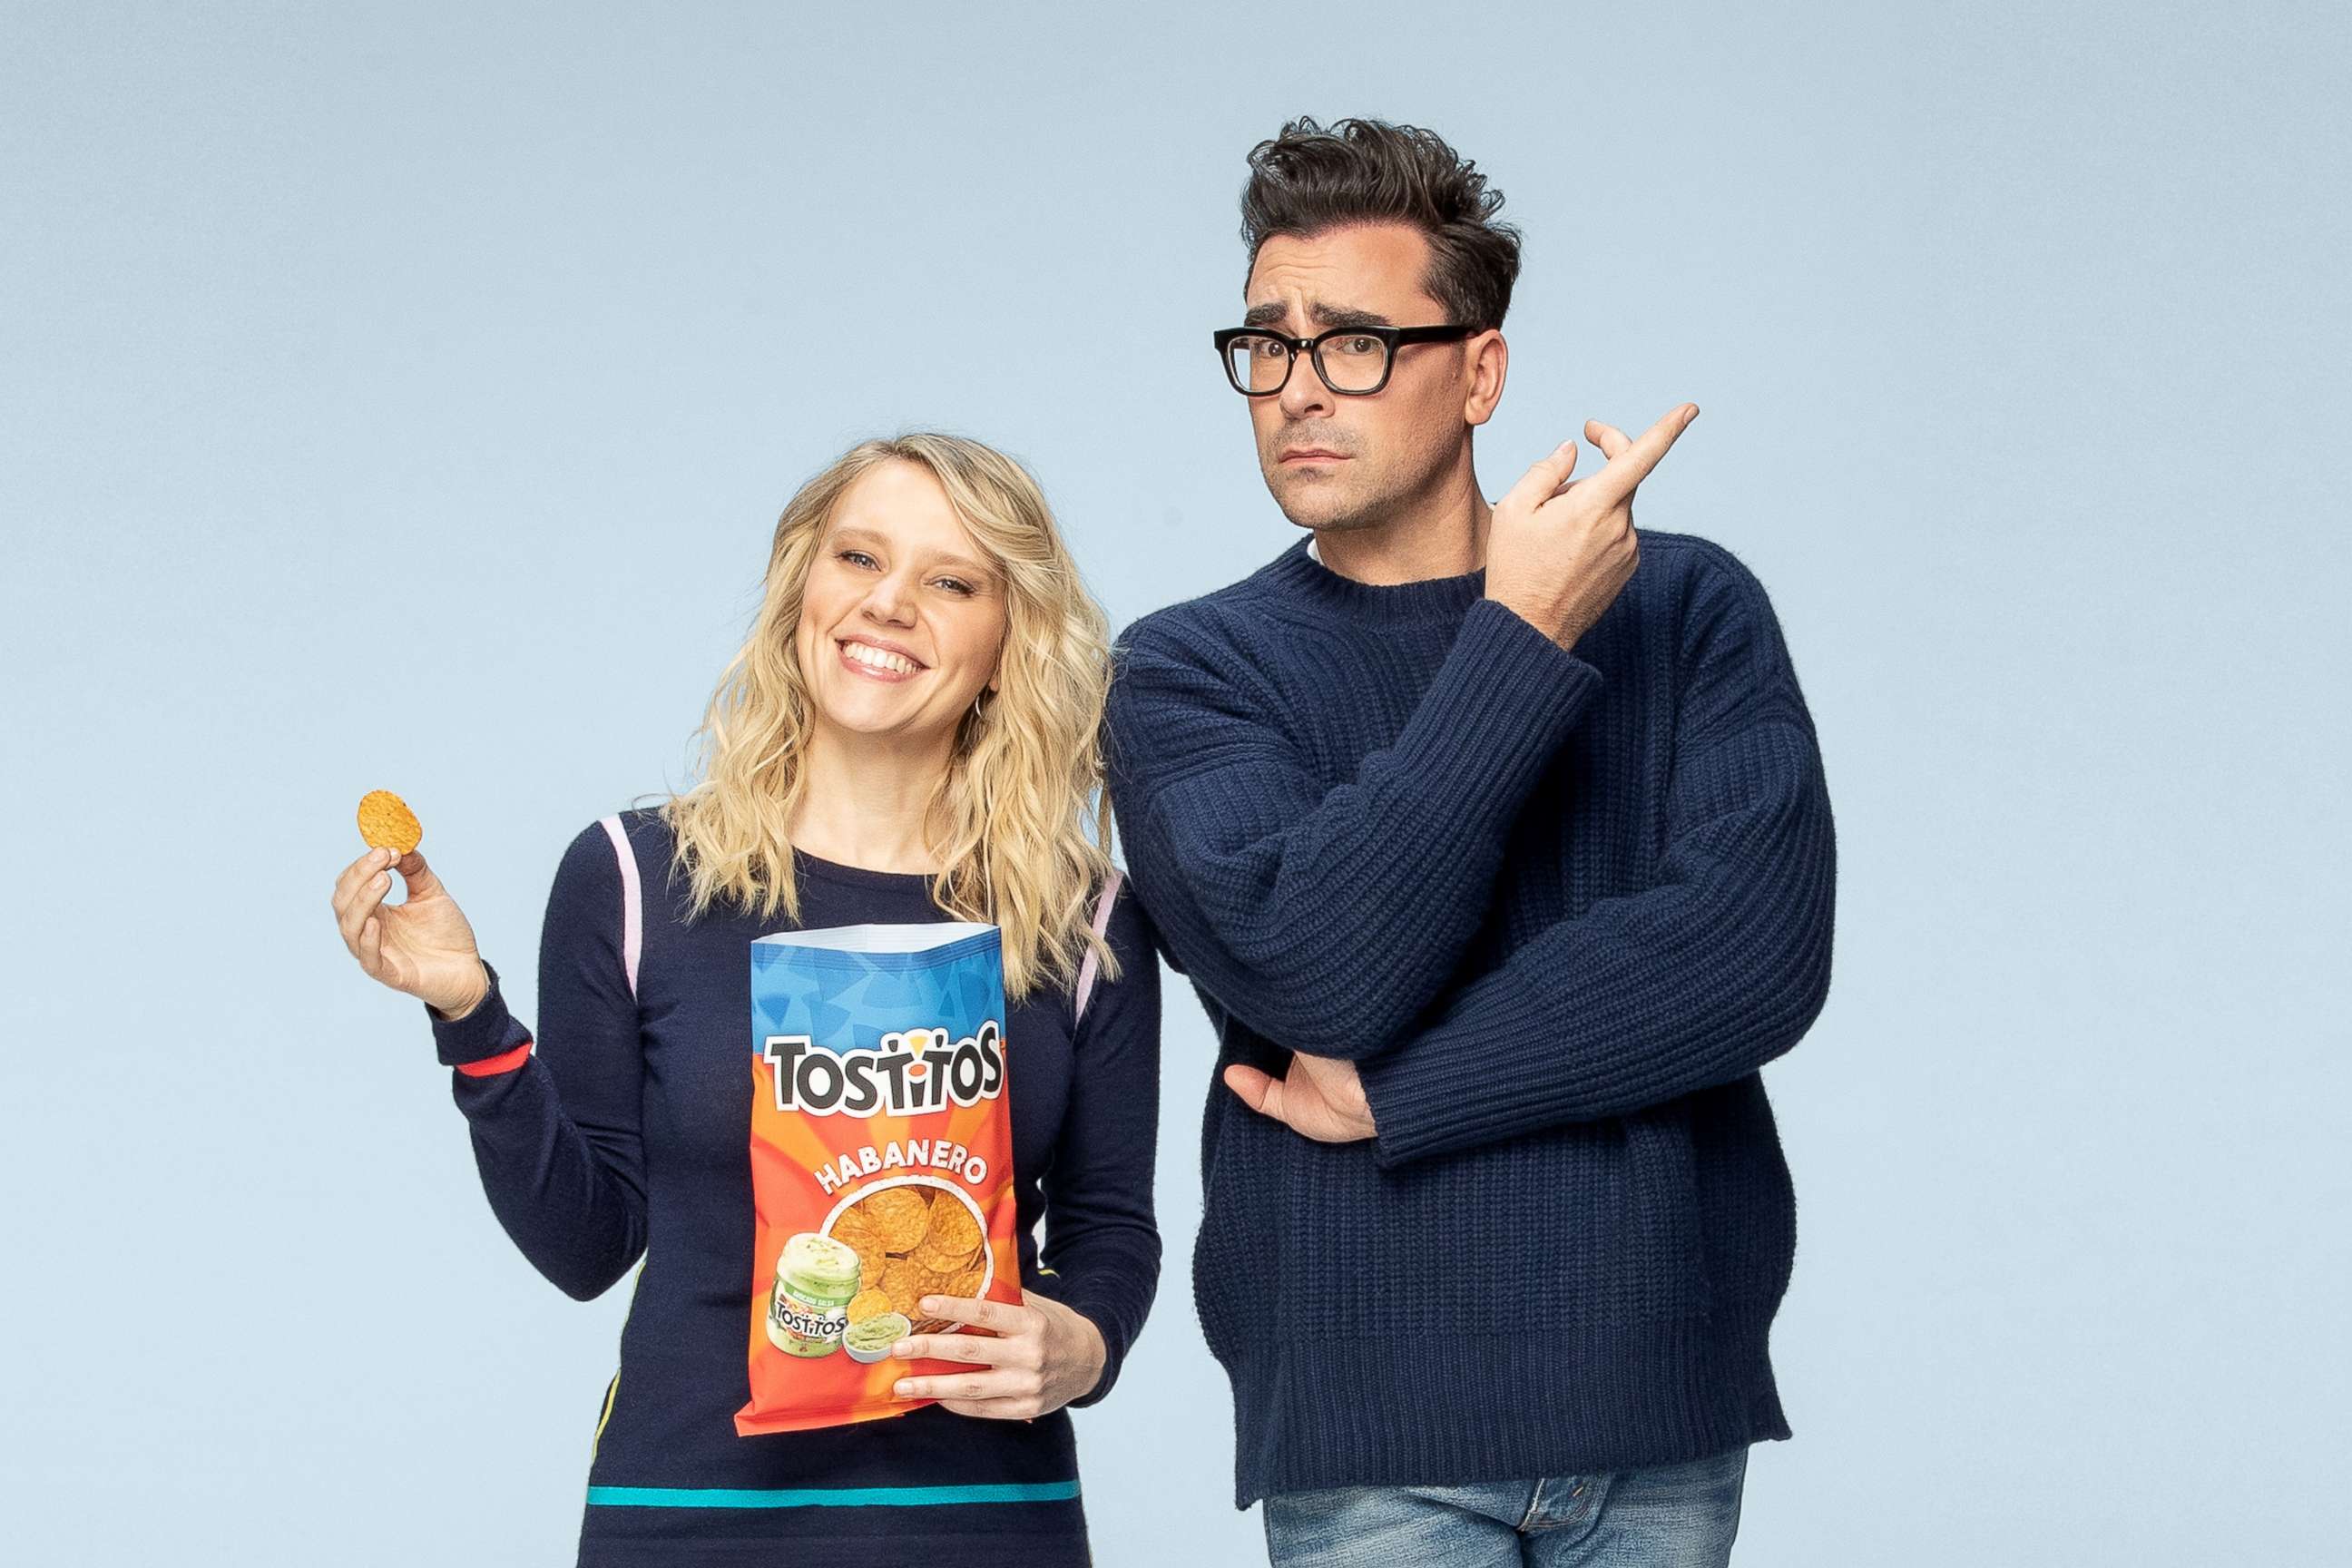 PHOTO: Kate McKinnon and Dan Levy are the faces of the new Tostitos Habanero commercials.